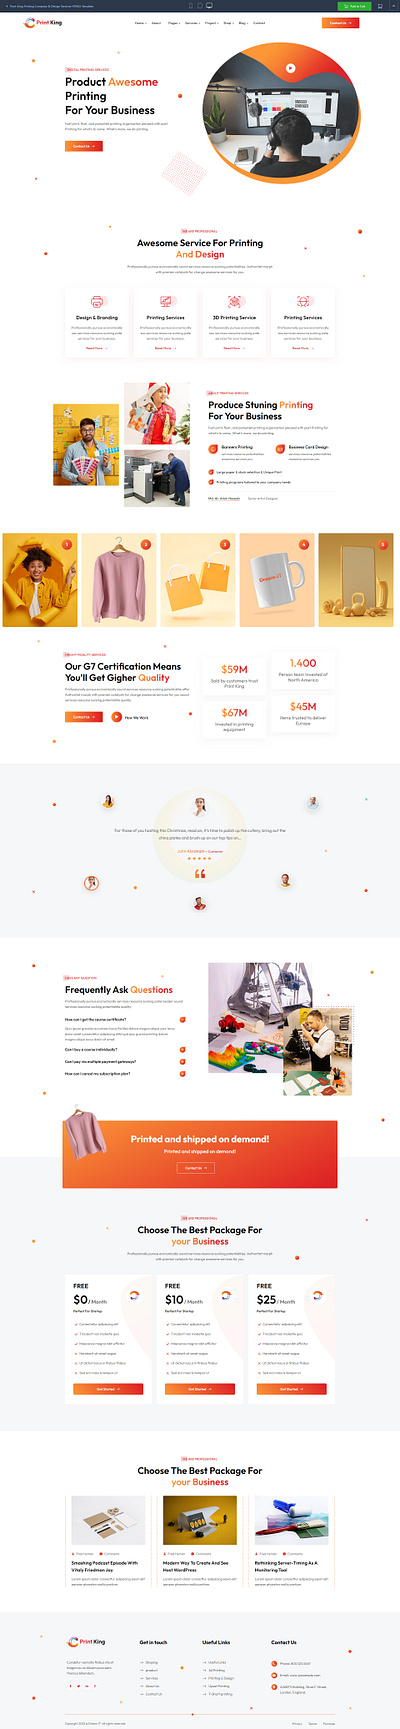 Print-King Printing Company & Design Services HTML5 Template agency corporate